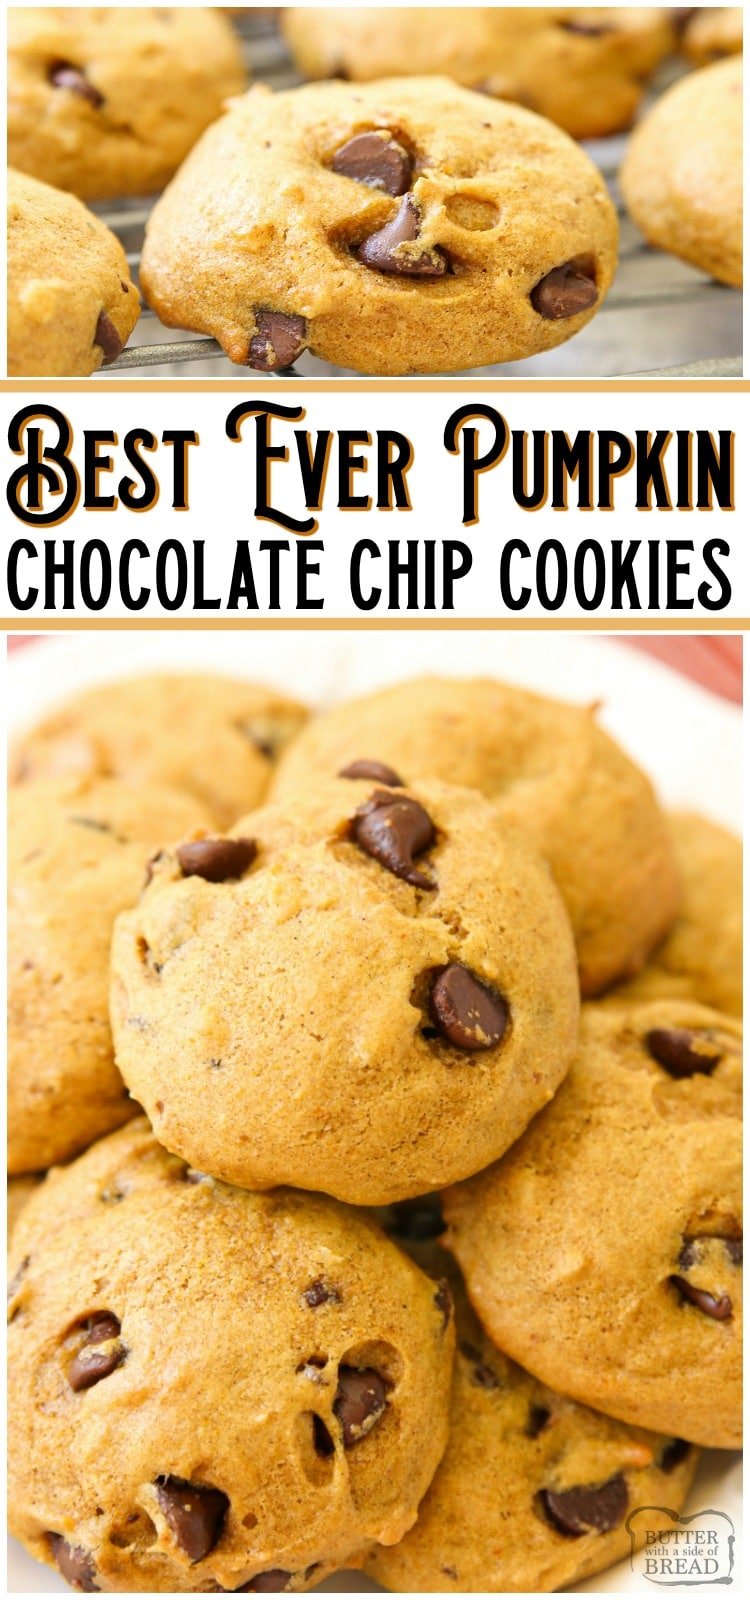 Pumpkin Chocolate Chip Cookies are soft & pillowy cookies with great pumpkin flavor! Made with pumpkin, chocolate chips and a lovely blend of Fall spices, these pumpkin cookies are a Fall favorite! #pumpkin #chocolatechip #cookies #baking #Fall #dessert #recipe from BUTTER WITH A SIDE OF BREAD